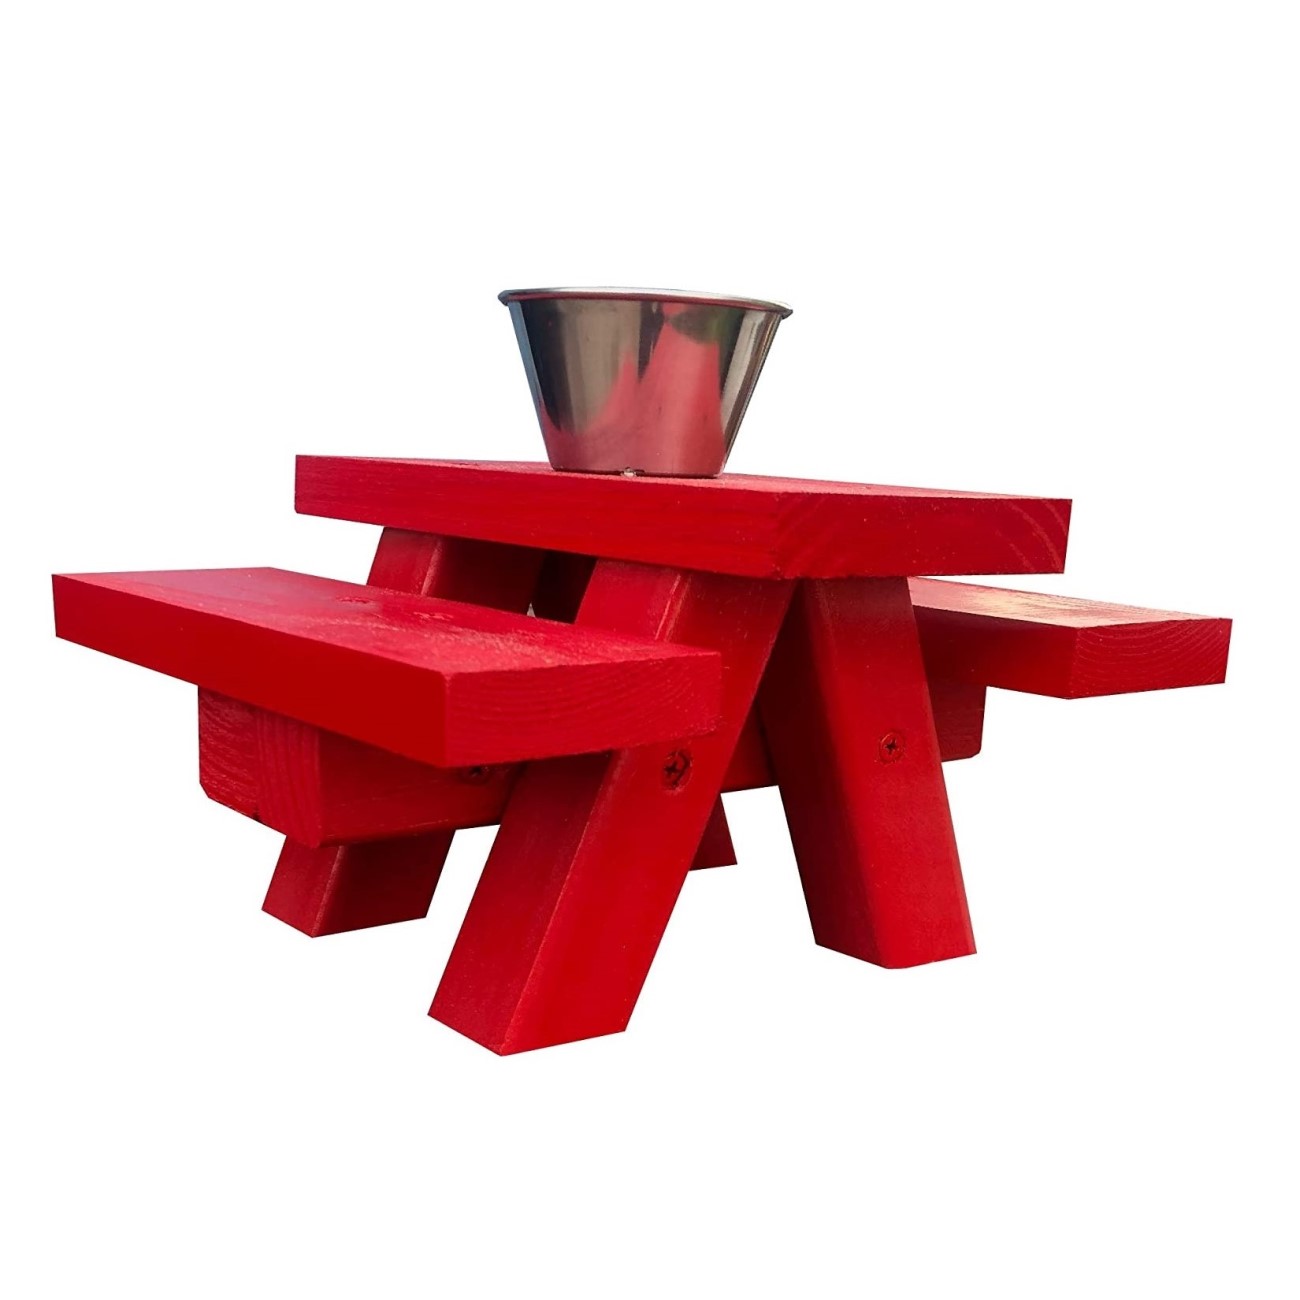 SquirrelSupply.com - Squirrel Feeder Picnic Table with Cup Feed - Floor or Table Top Mount - Red - Large Size - Hand Made in USA - No Tools Required